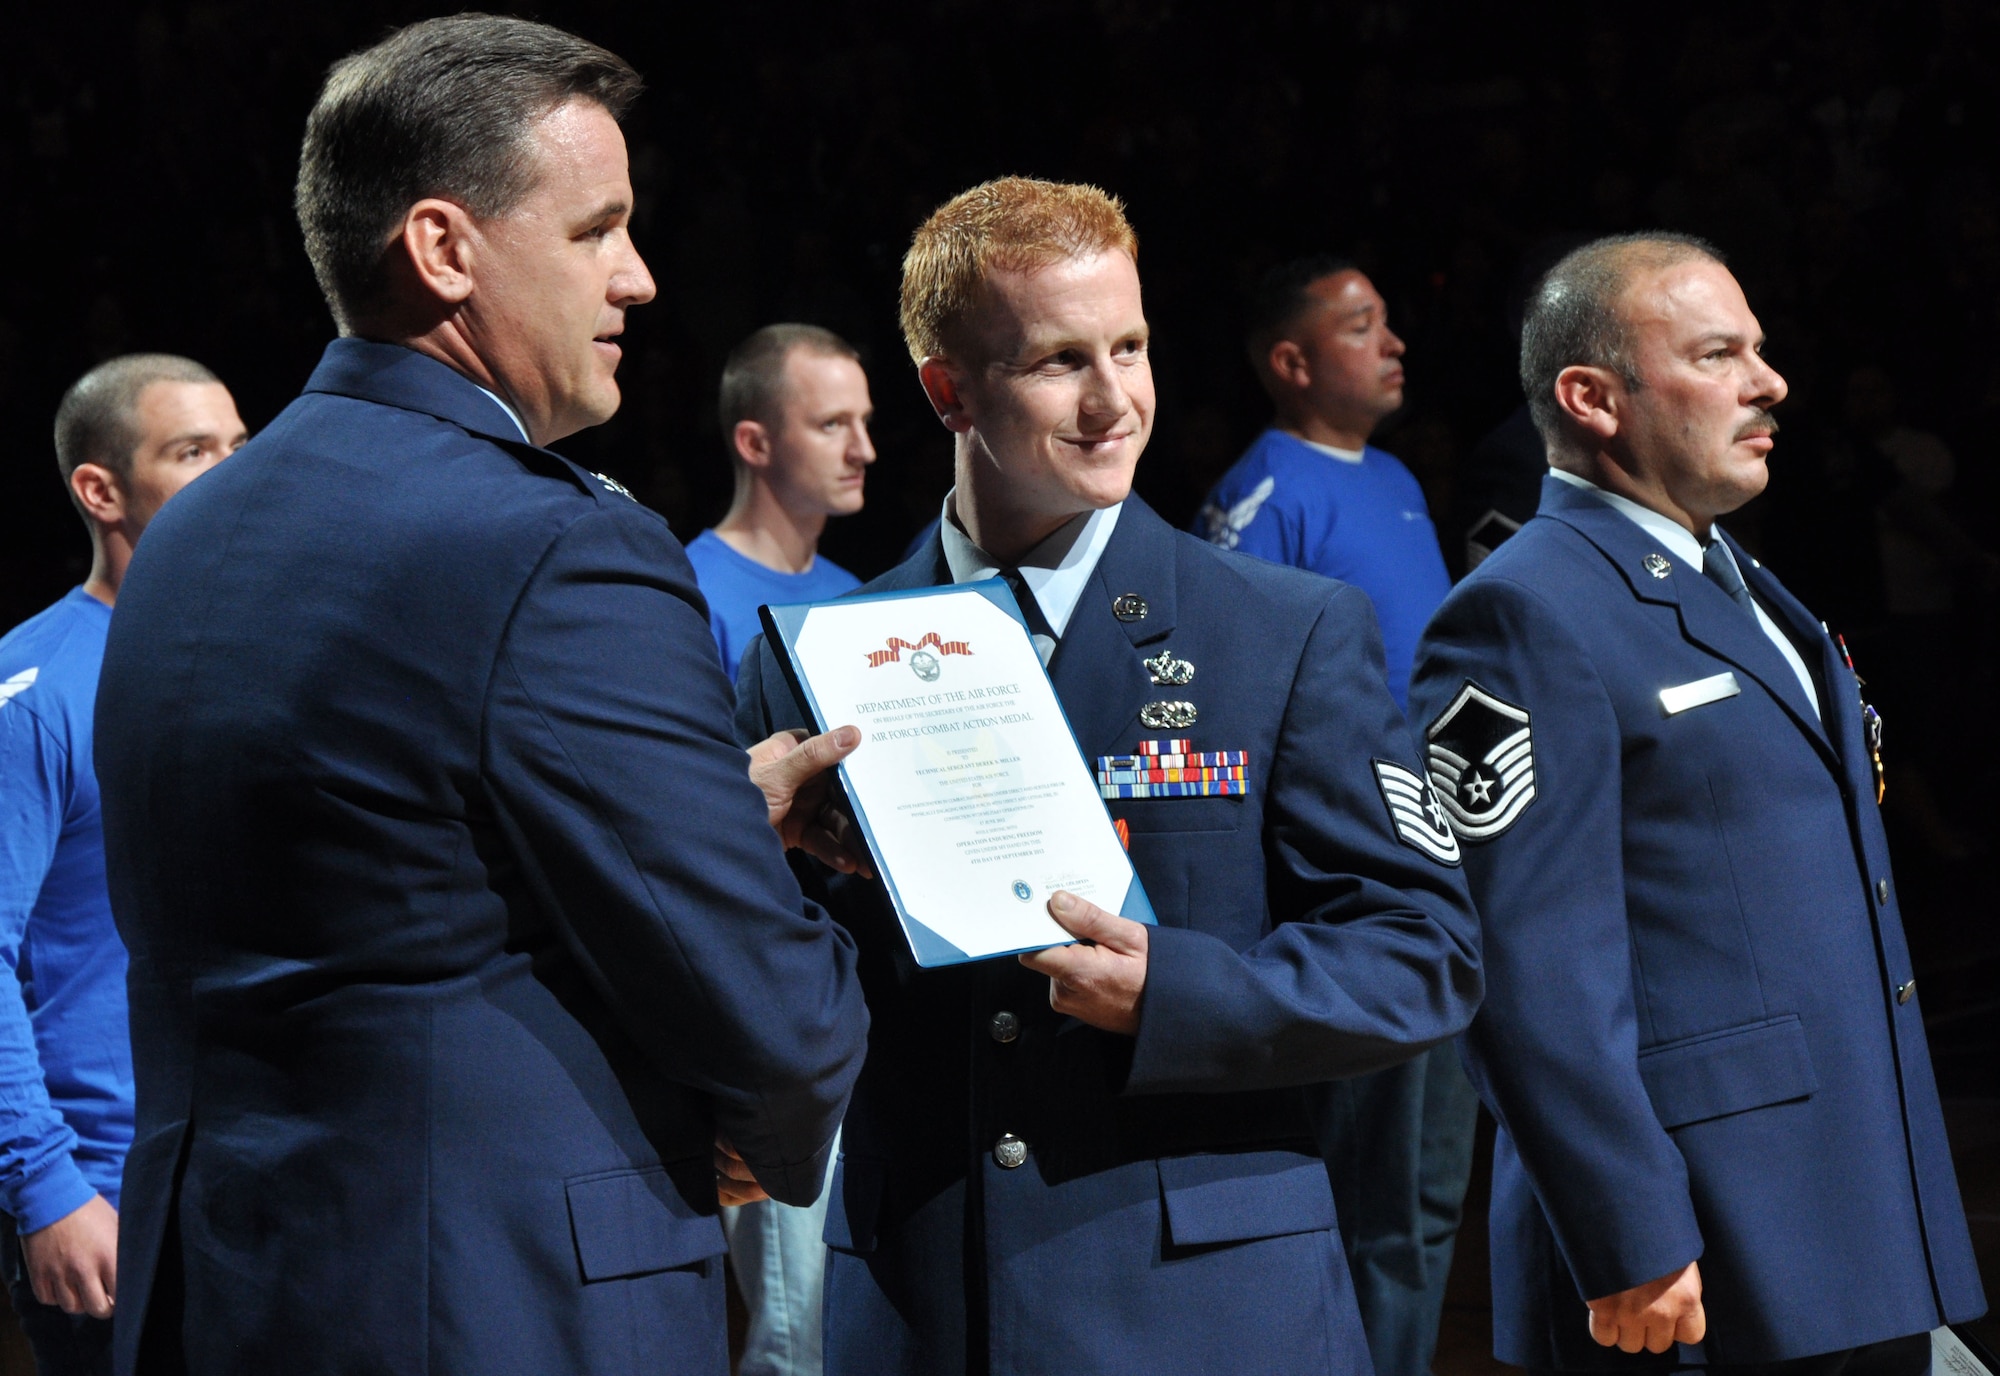 Col. Kevin Cavanagh, 940th Wing commander, presents Tech. Sgt. Derek with the Air Force Combat Action Medal for his actions in Operation Enduring Freedom at the Sacramento Kings military appreciation game in Sacramento, Calif., Nov 9, 2012. The Kings held a military appreciation night in honor of Veterans Day. (U.S. Air Force photo by Staff Sgt. Robert M. Trujillo/Released)